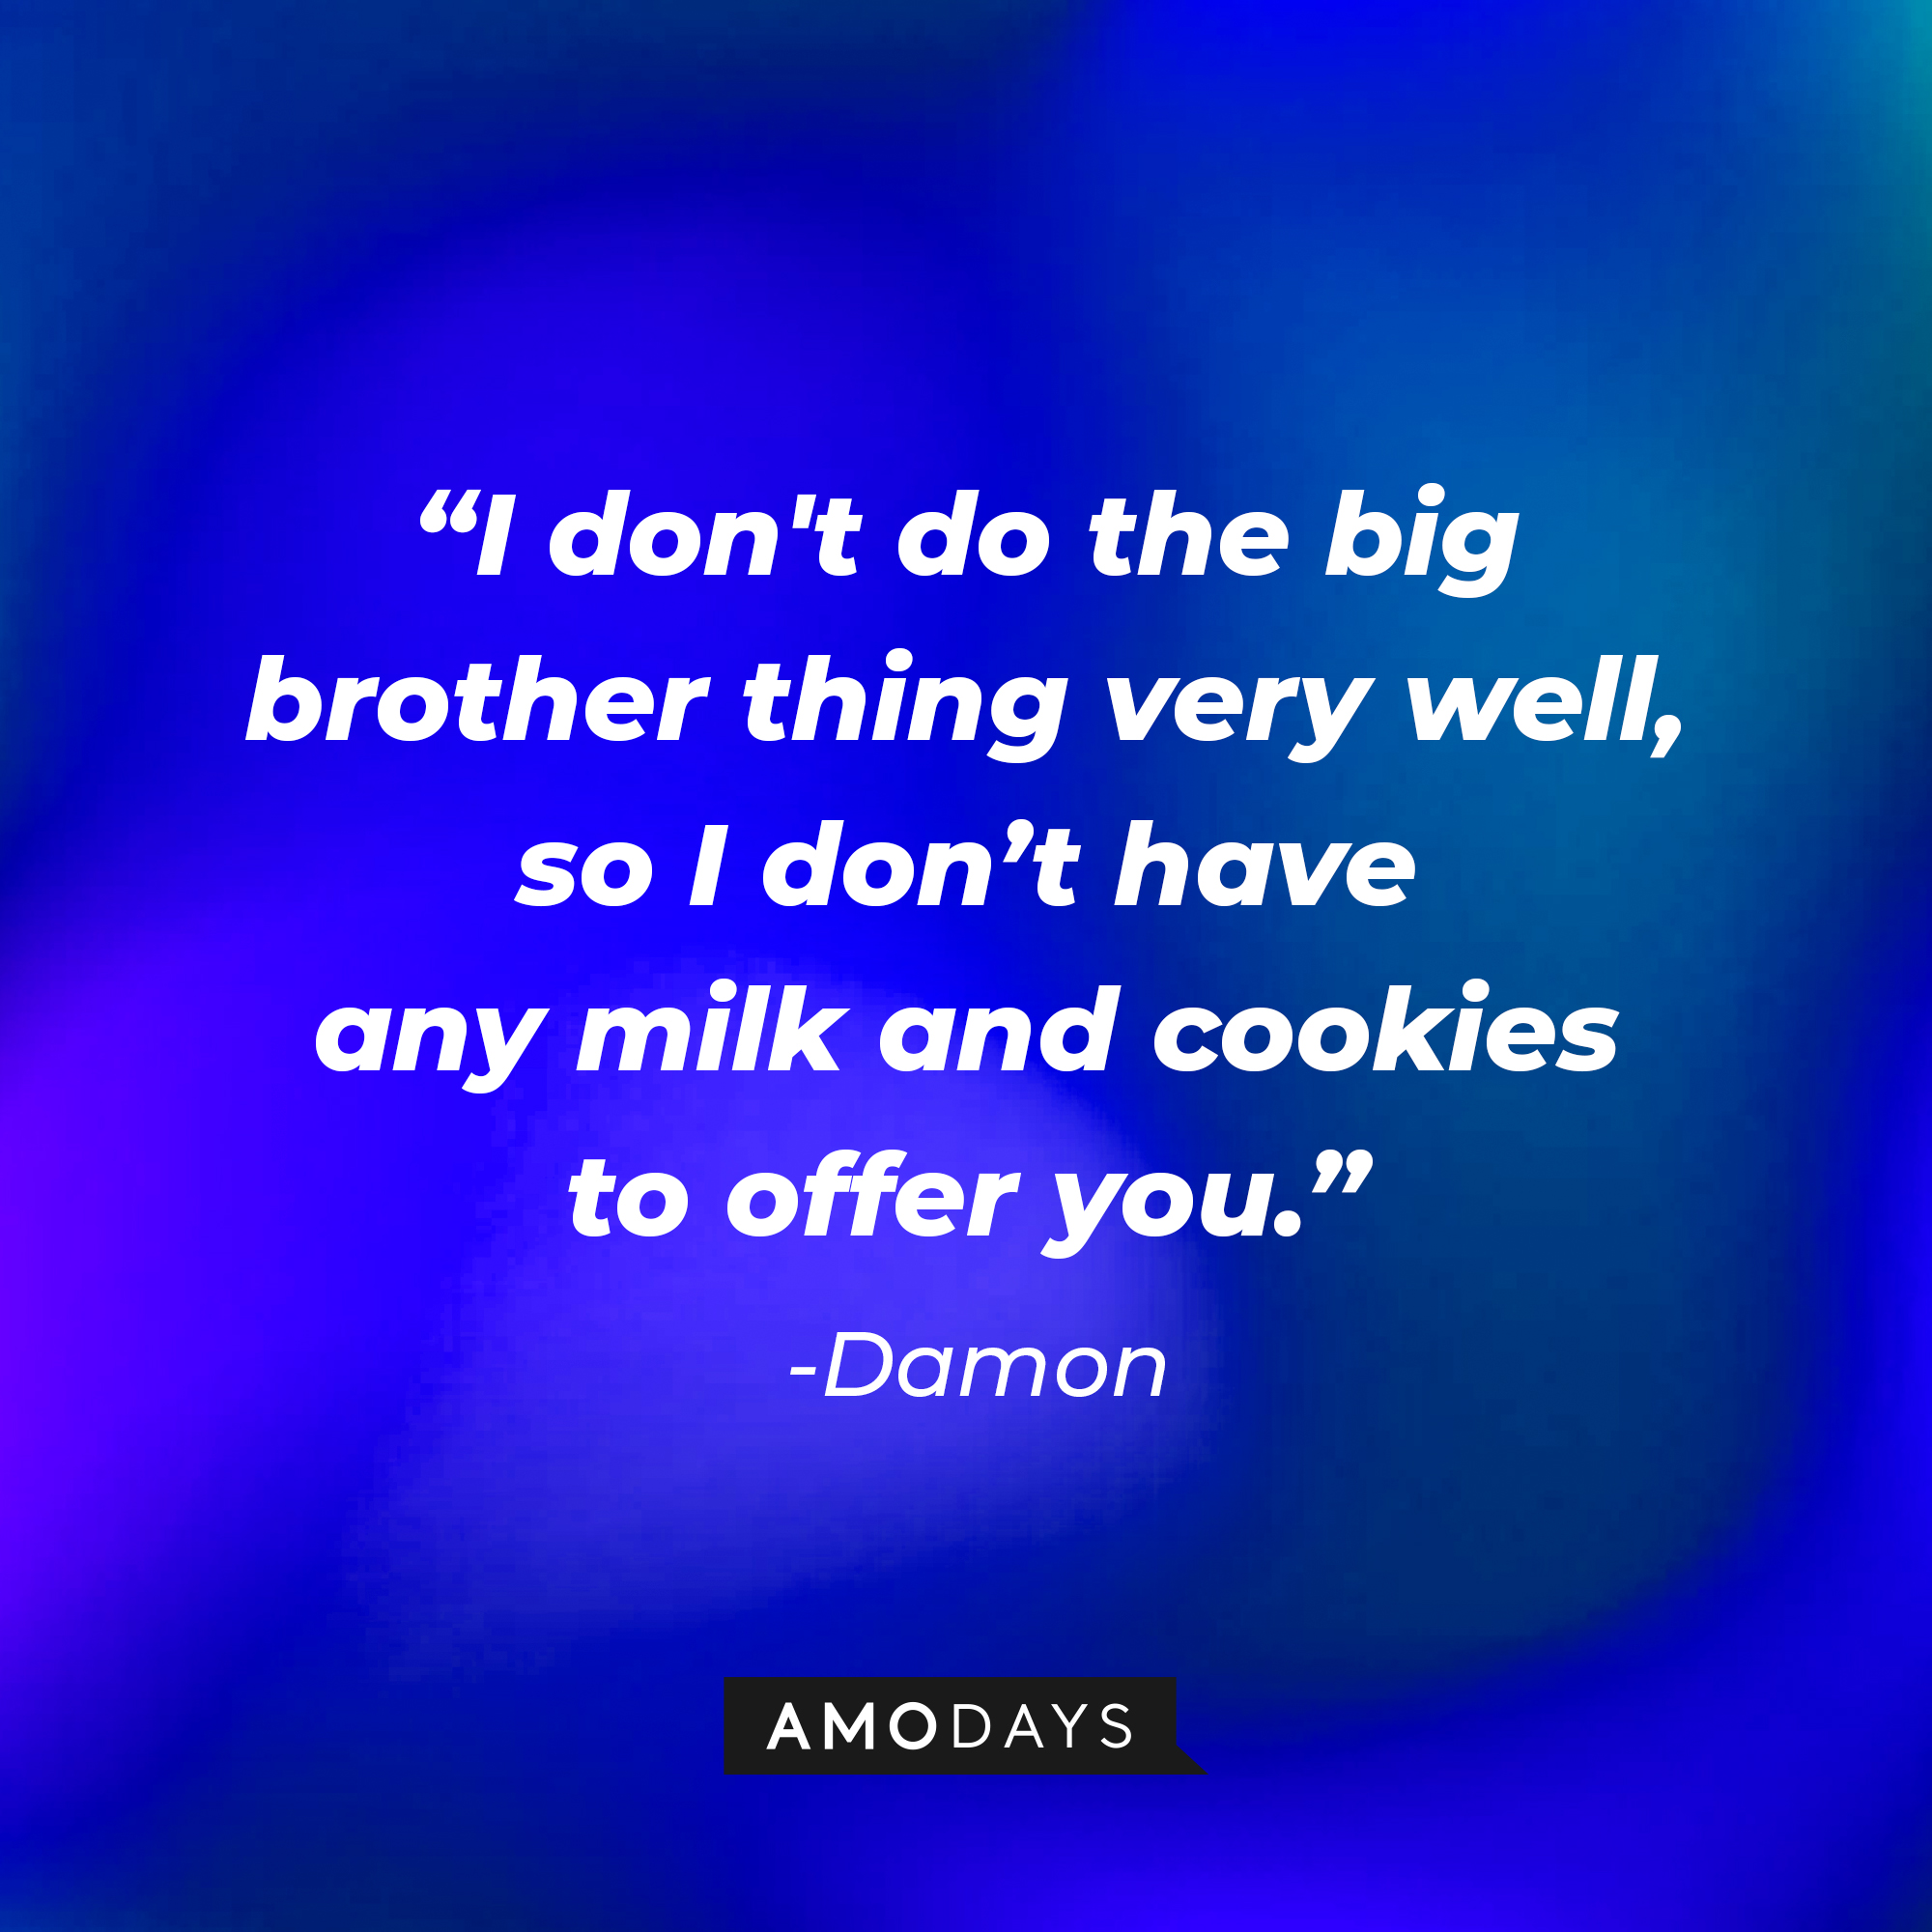 Damon's quote: "I don't do the big brother thing very well, so I don't have any milk and cookies to offer you." | Source: Amodays